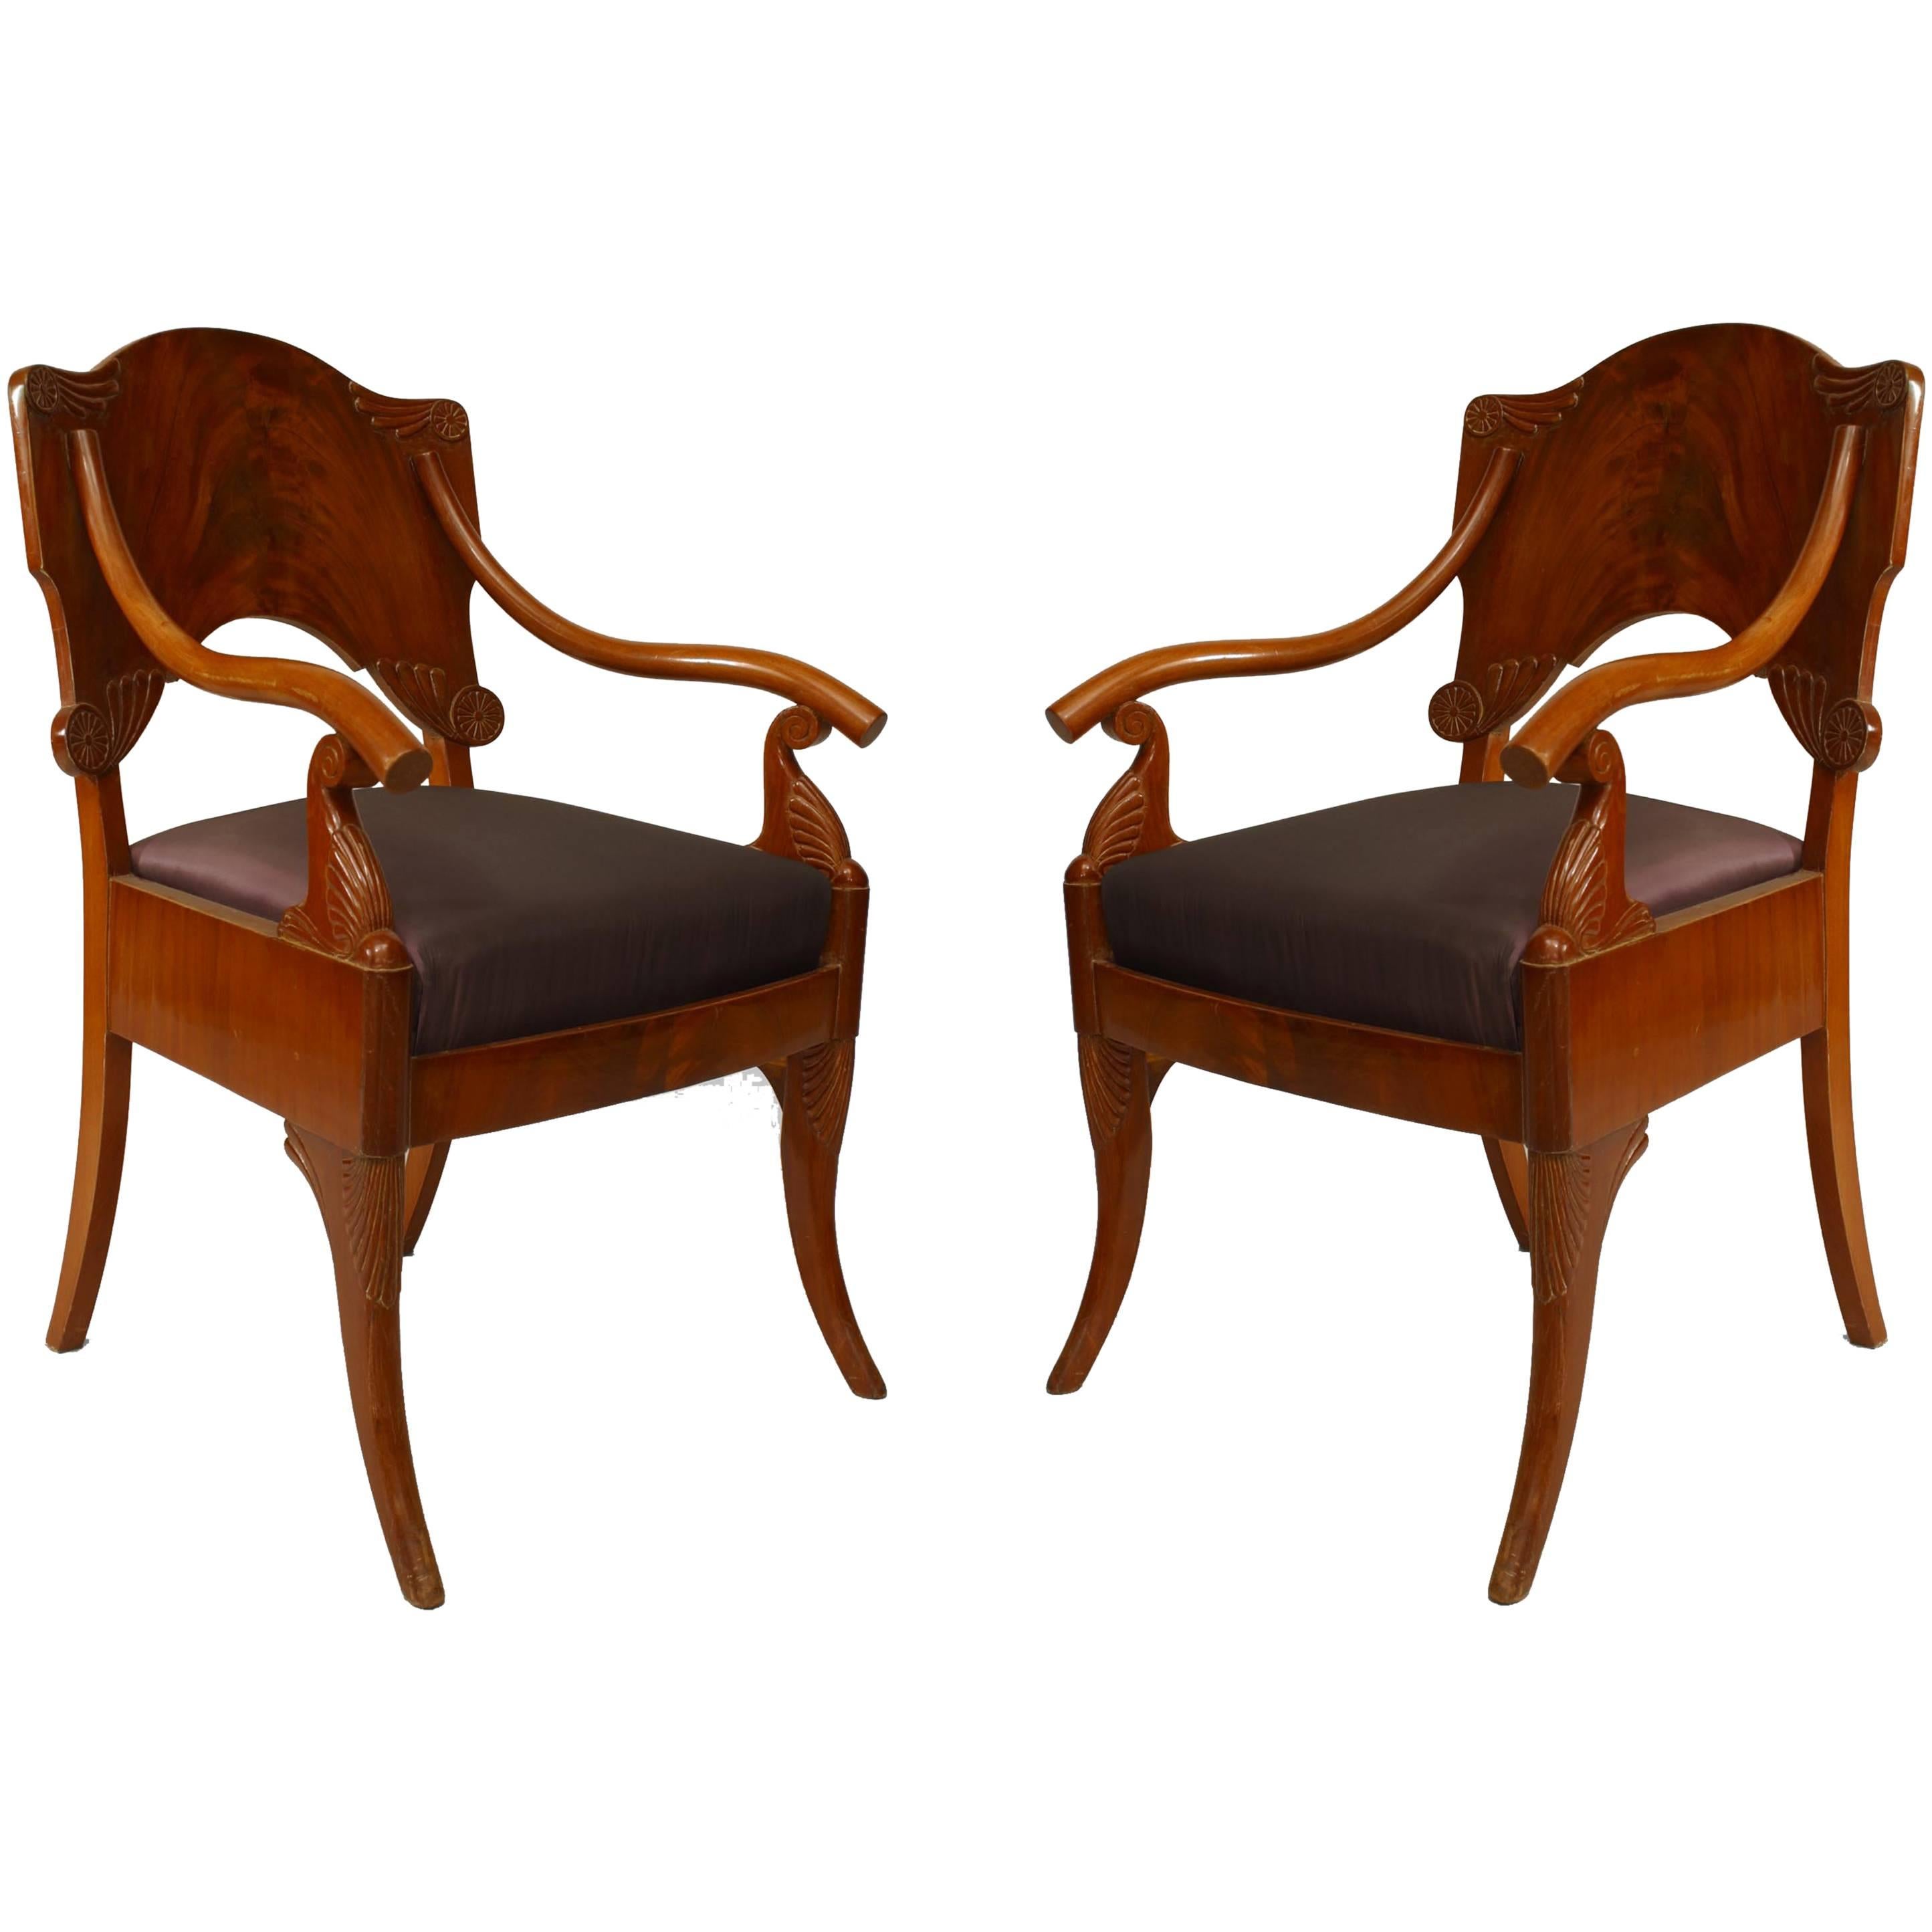 Pair of Russian Mahogany Foliate Armchairs For Sale